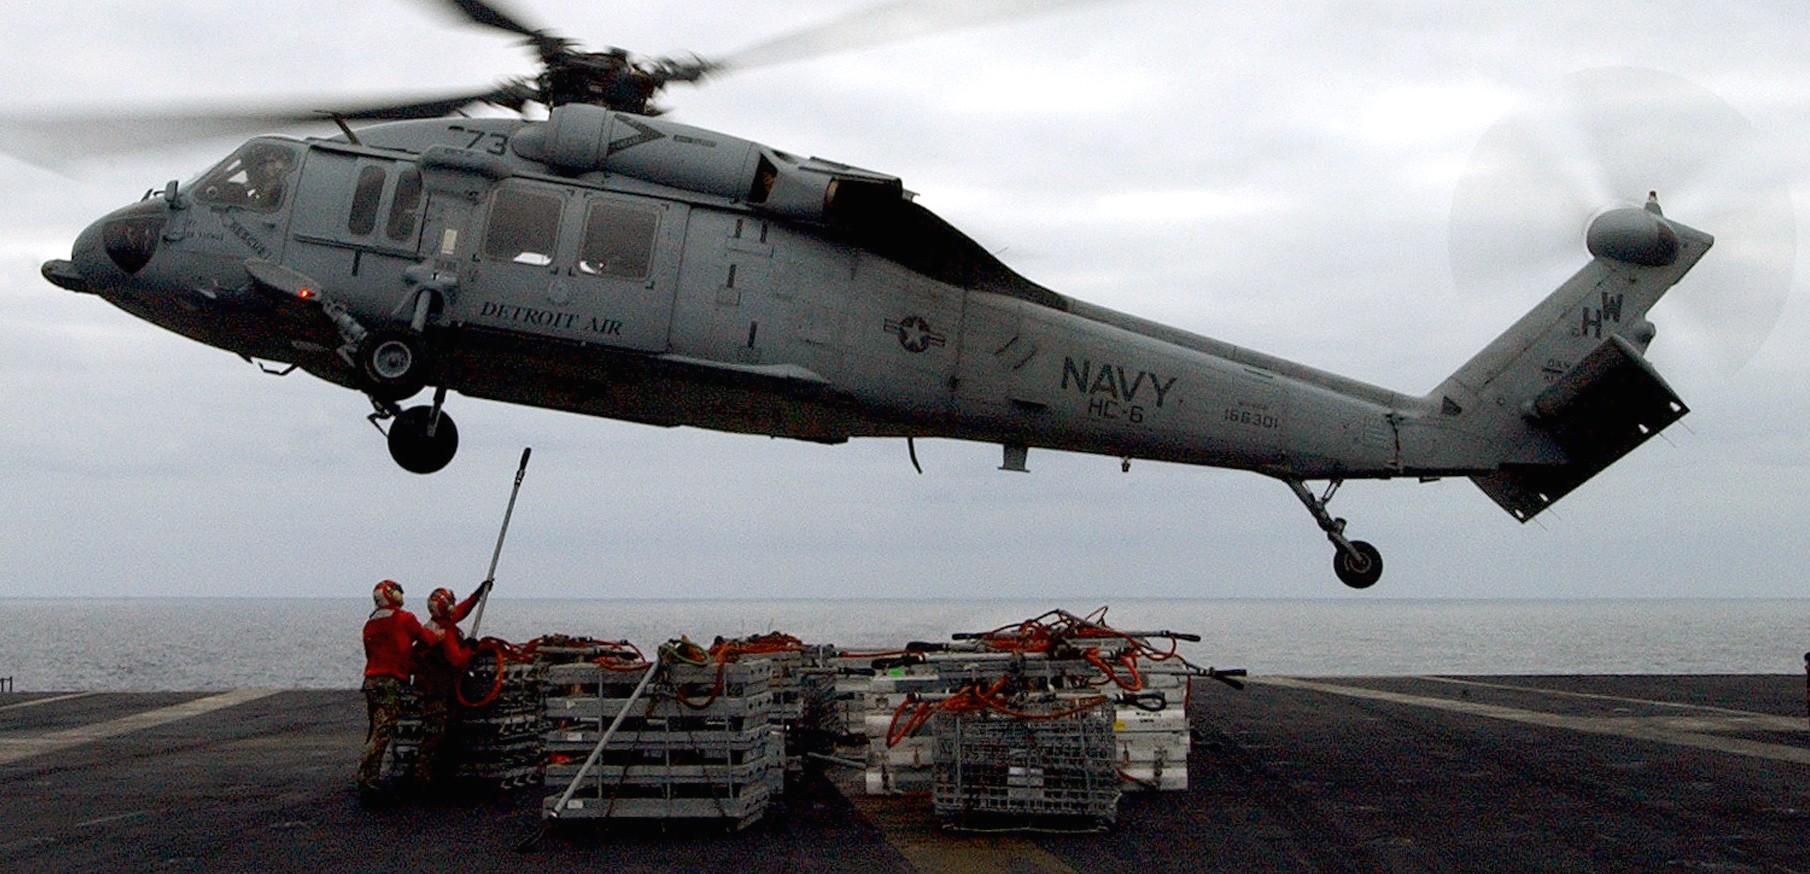 hc-6 chargers helicopter combat support squadron navy mh-60s seahawk 11